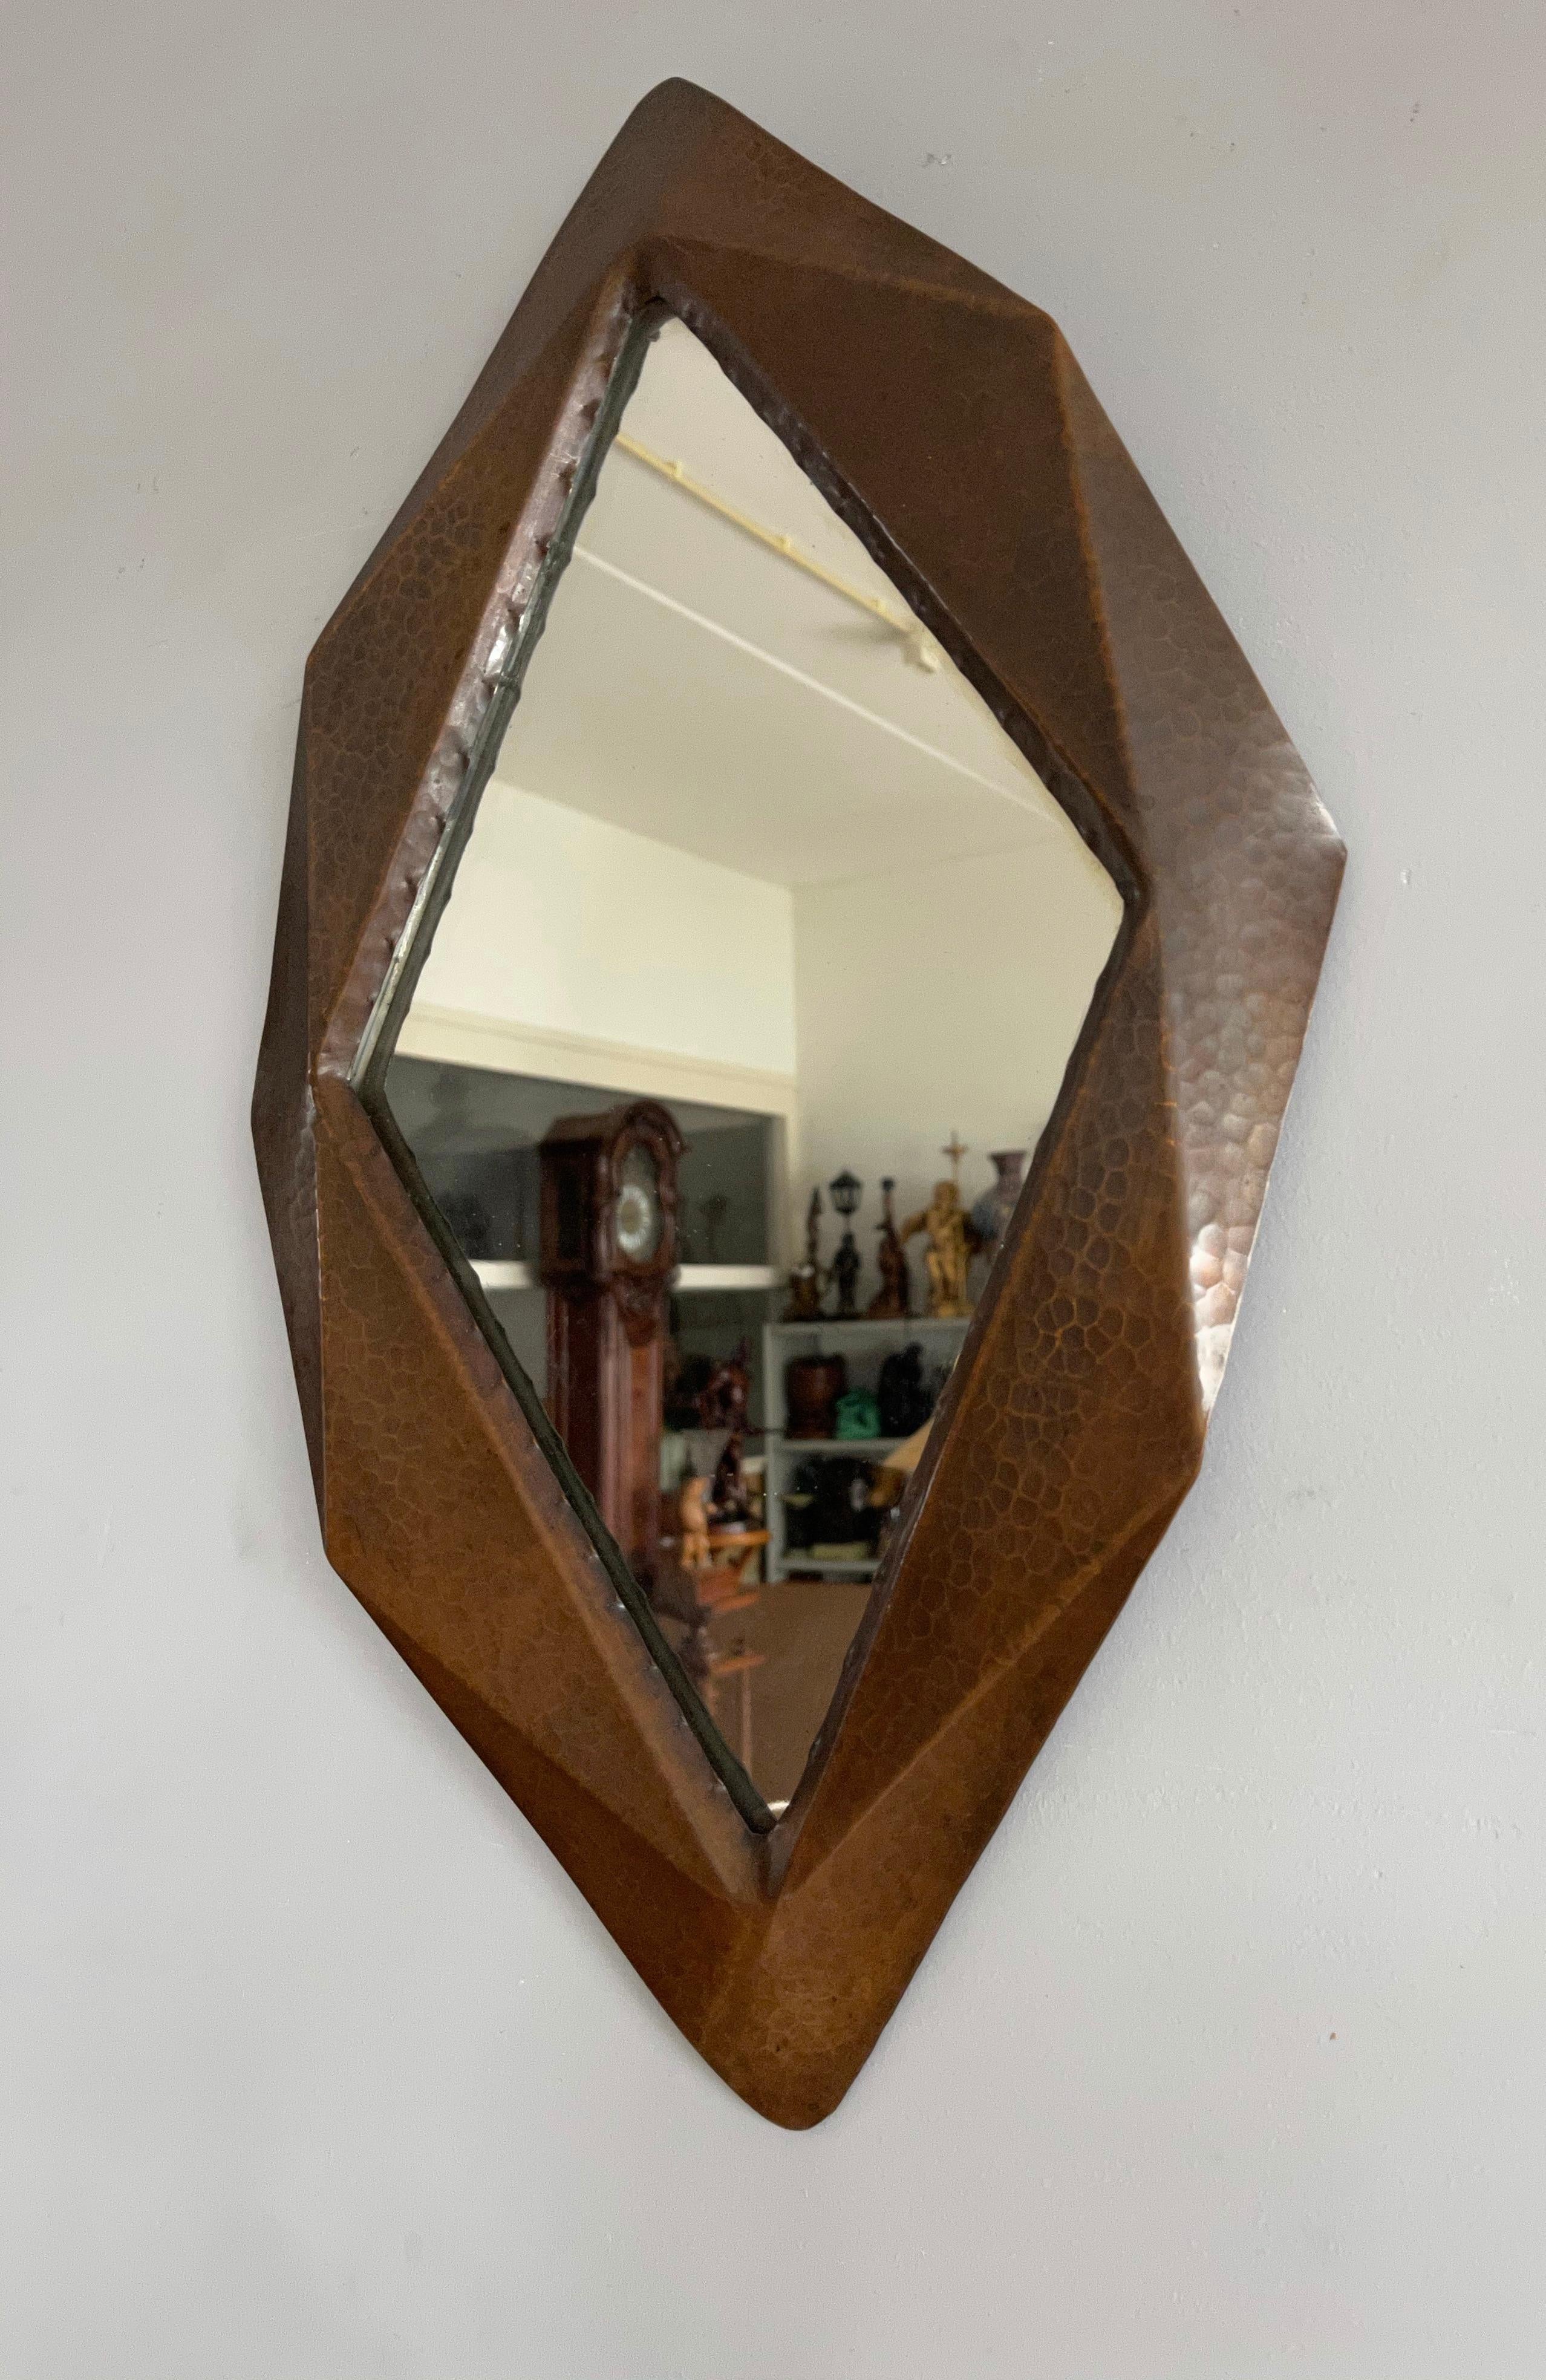 Unique Arts & Crafts Geometric, Cubist Shape, Crafted Copper Hallway Wall Mirror For Sale 5